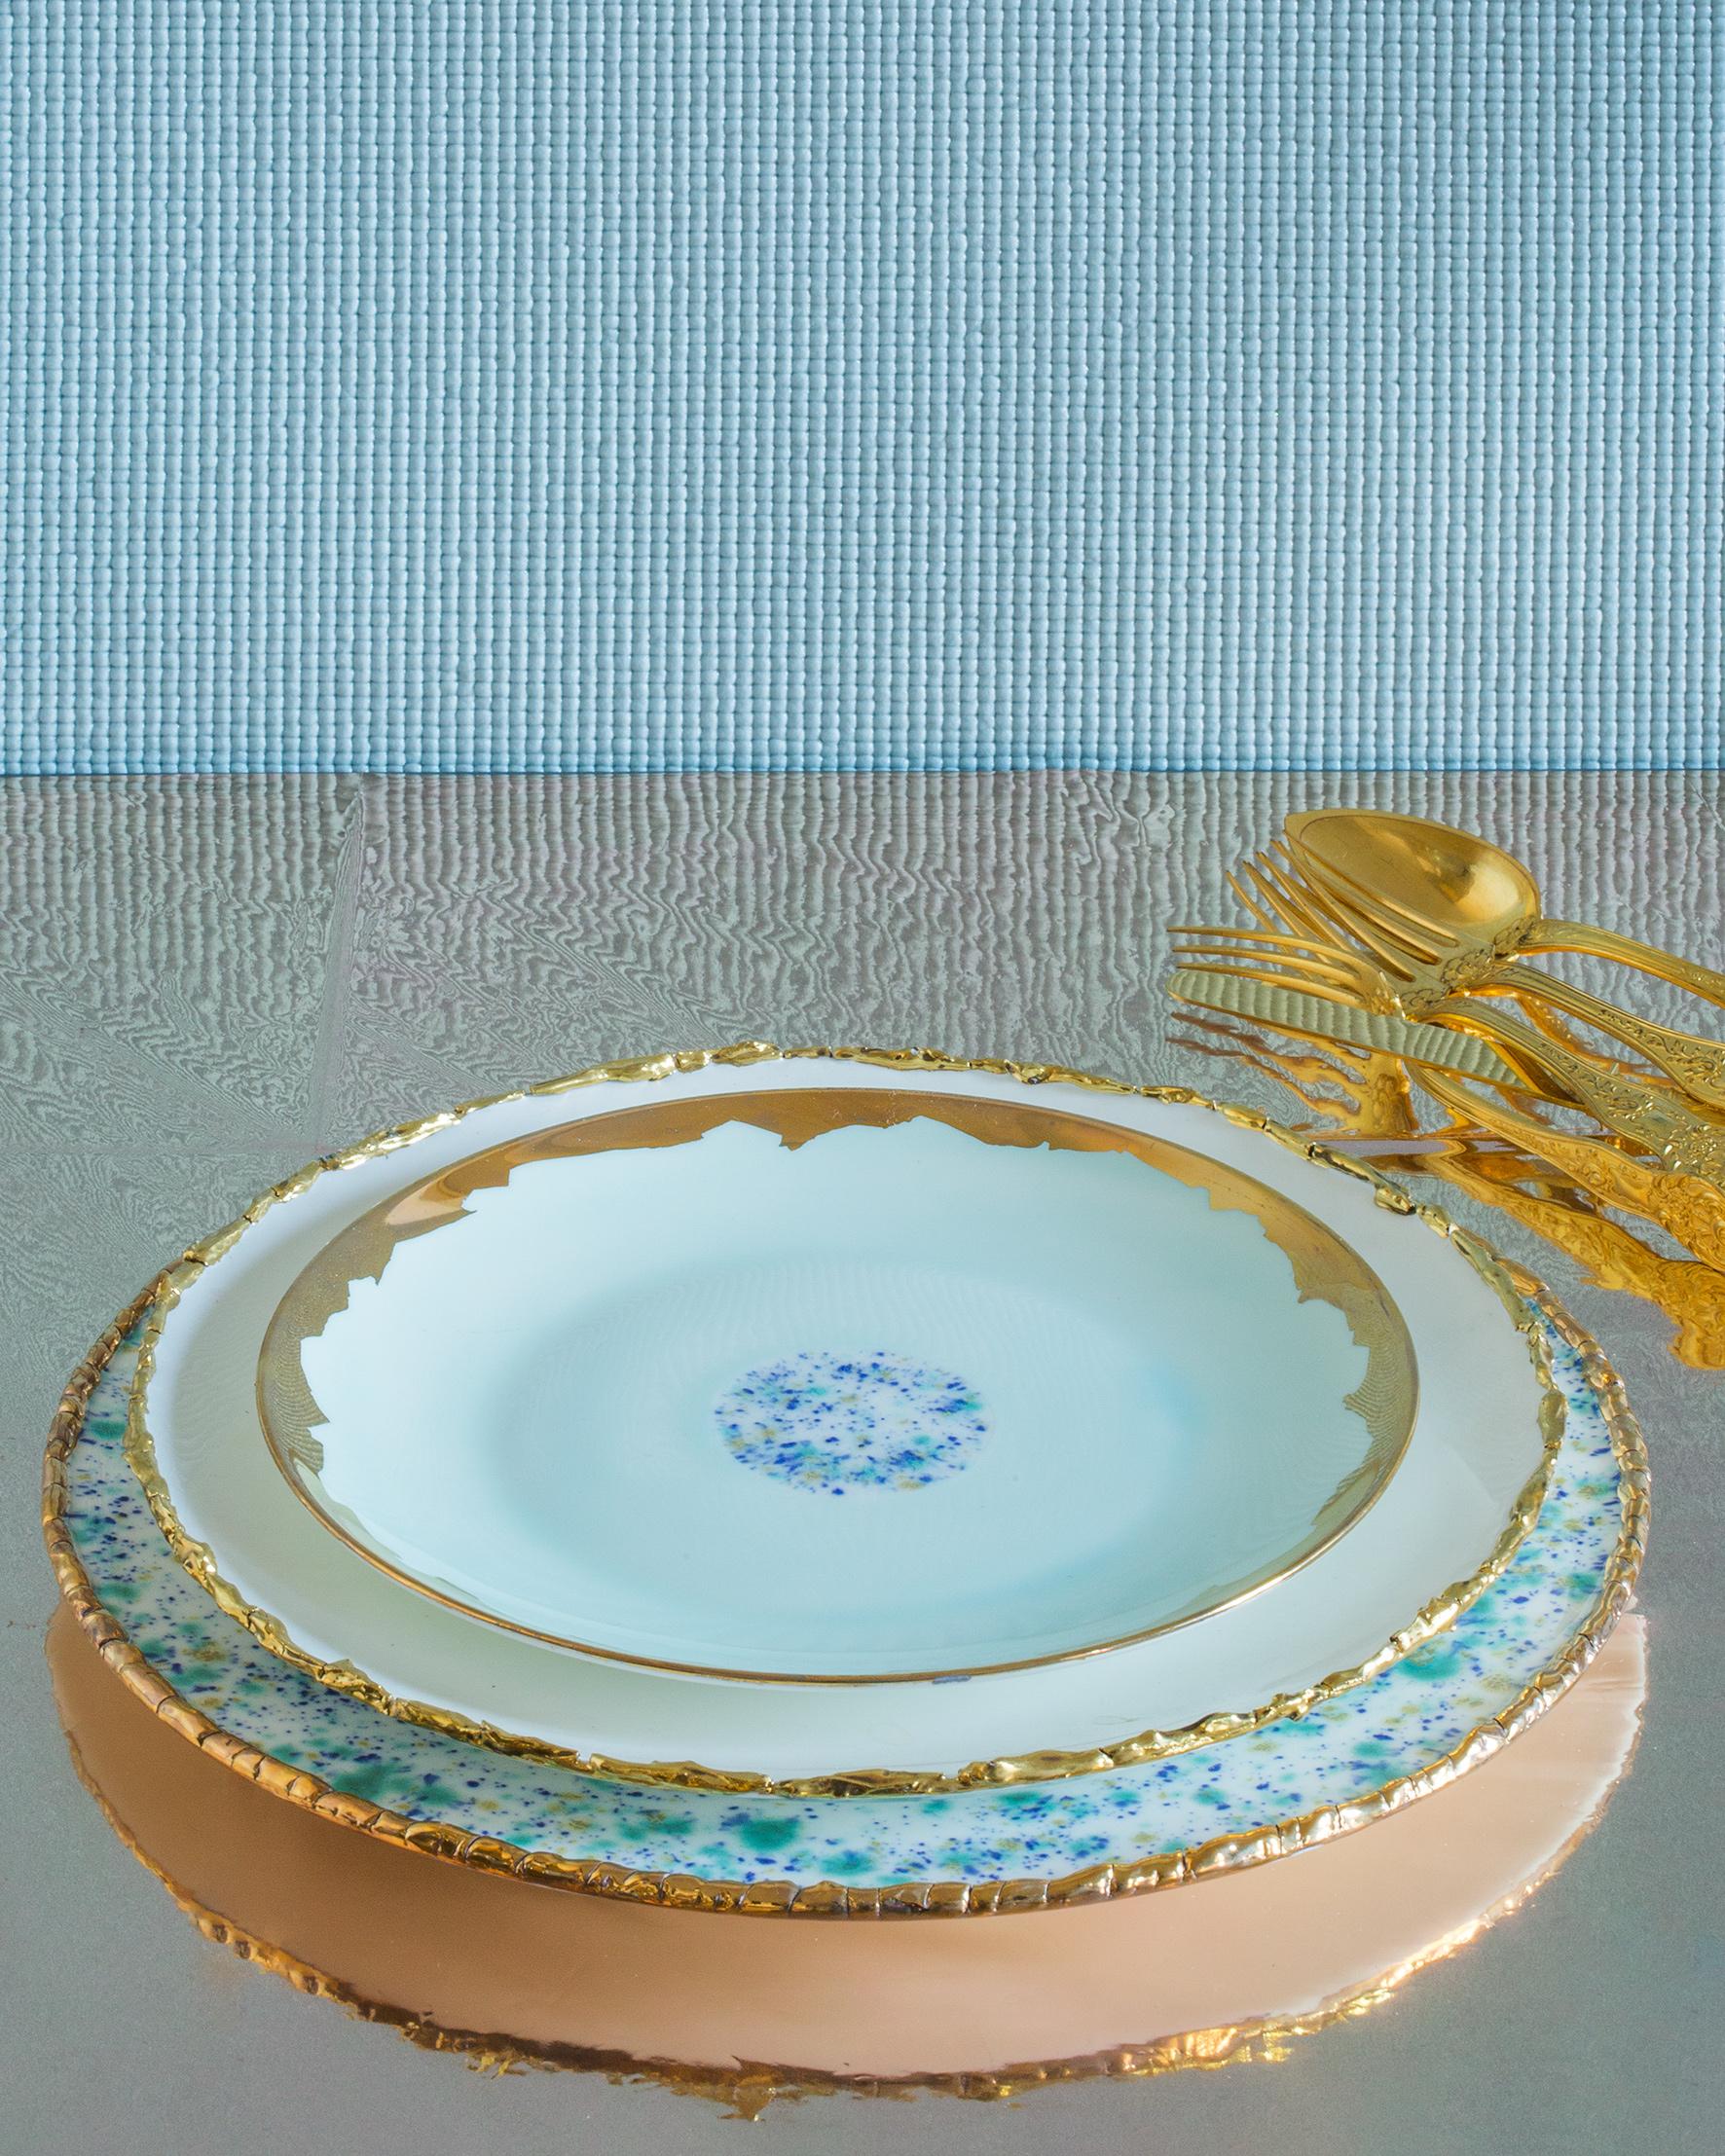 Handcrafted in Italy from the finest porcelain, this Blue Marble charger plate has an original golden crackled rim emphasizing the blue yellow and green decor and emerald center.

Charger plate with rim, Craquelé Edge, Ø 31cm
Piazza del Popolo,